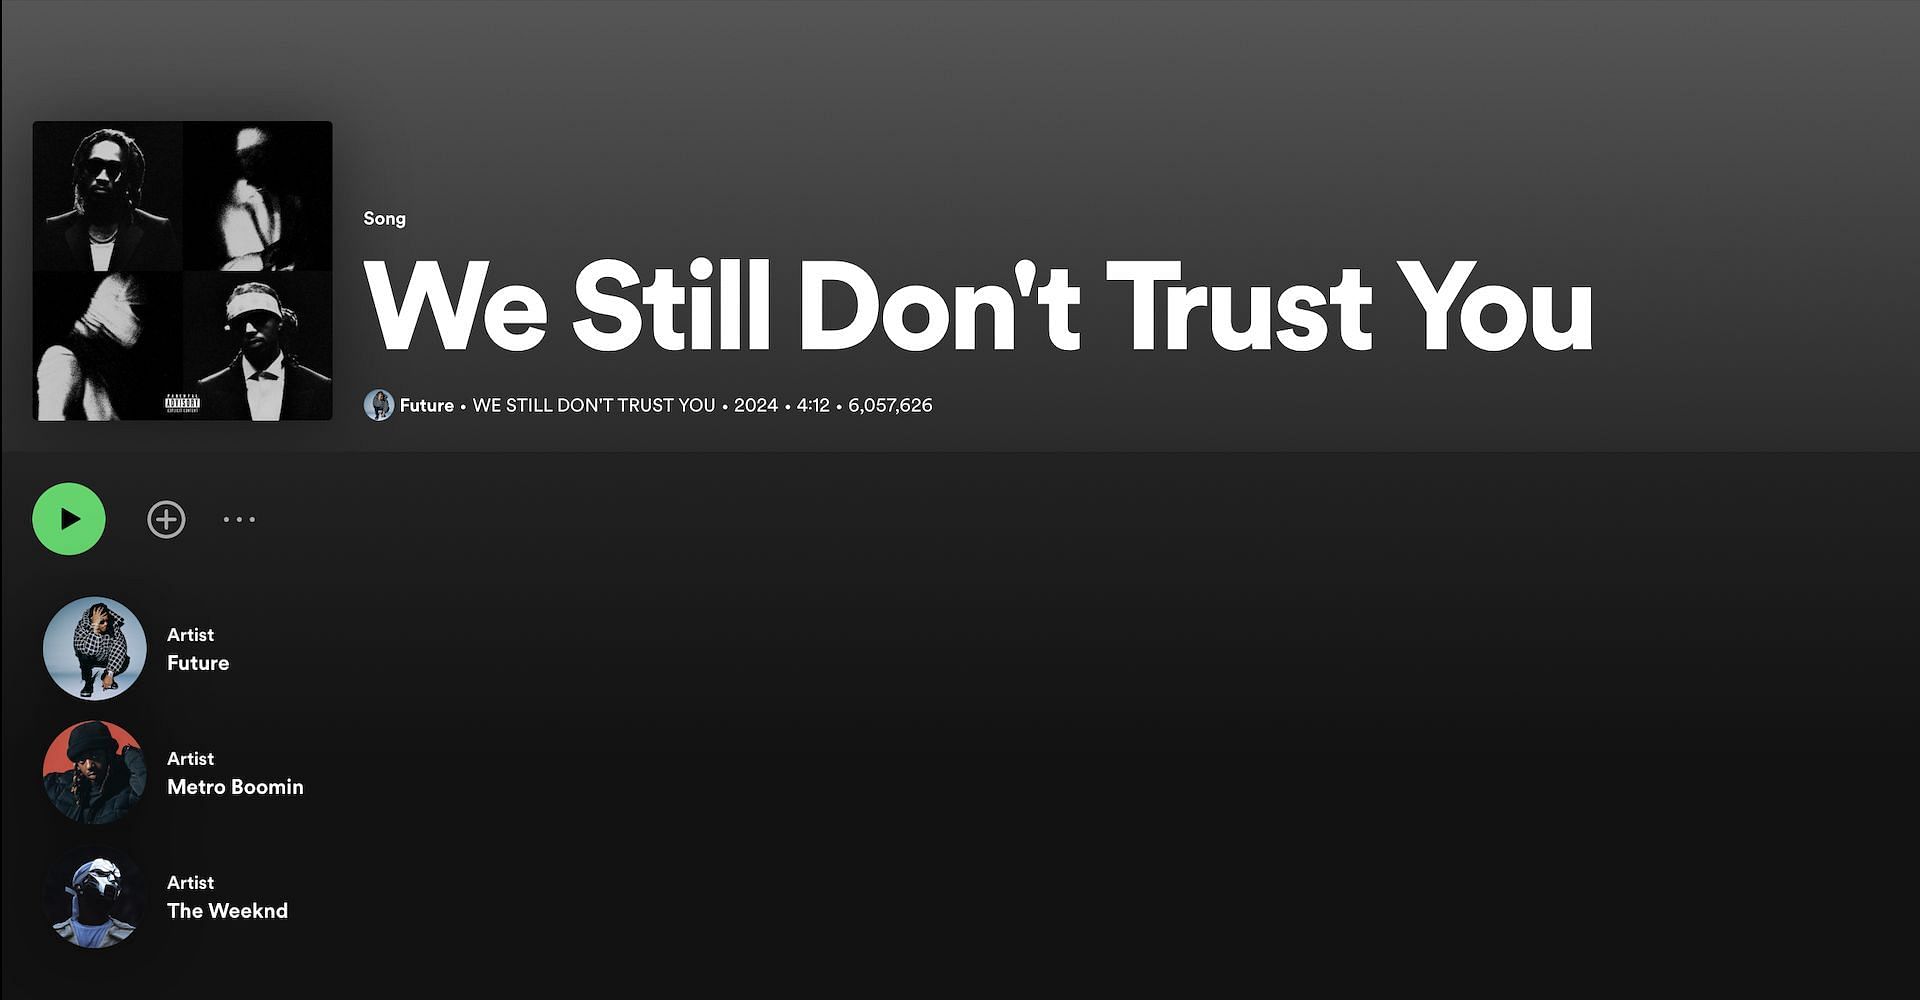 Track 1 on Disc 1 of Metro Boomin and Future&#039;s second collaboration for 2024 titled &#039;We Still Don&#039;t Trust You&#039; (Image via Spotify)